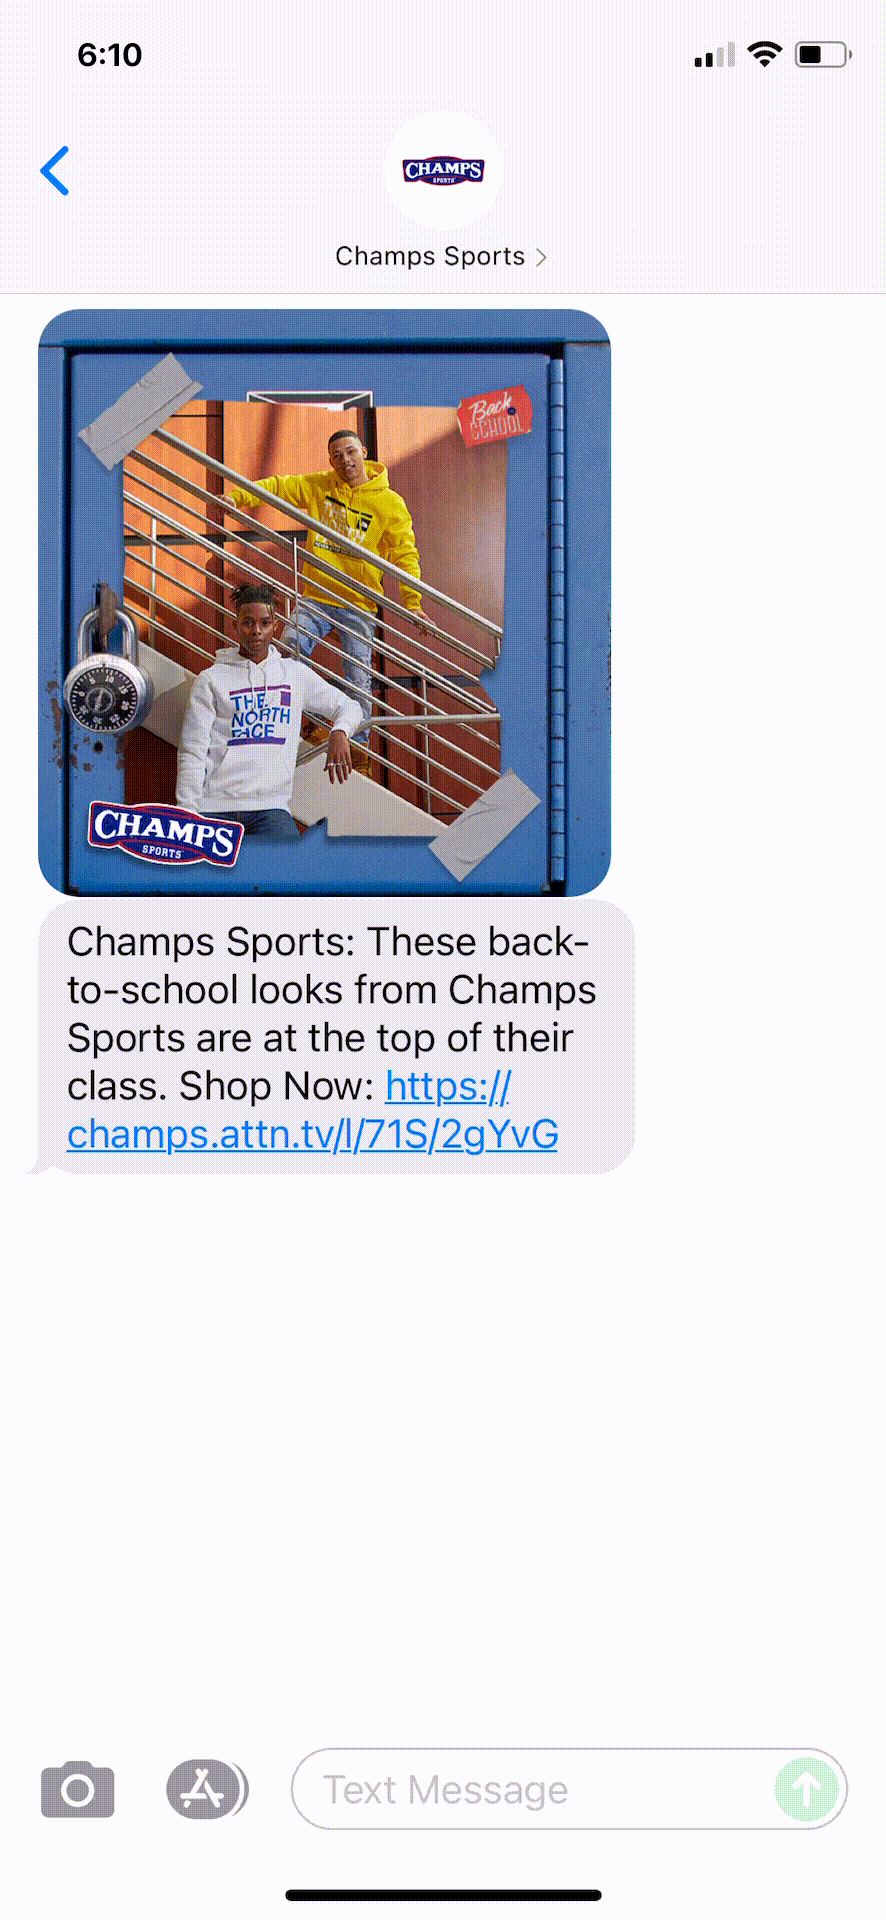 Champs-Sports-Text-Message-Marketing-Example-08.20.2021